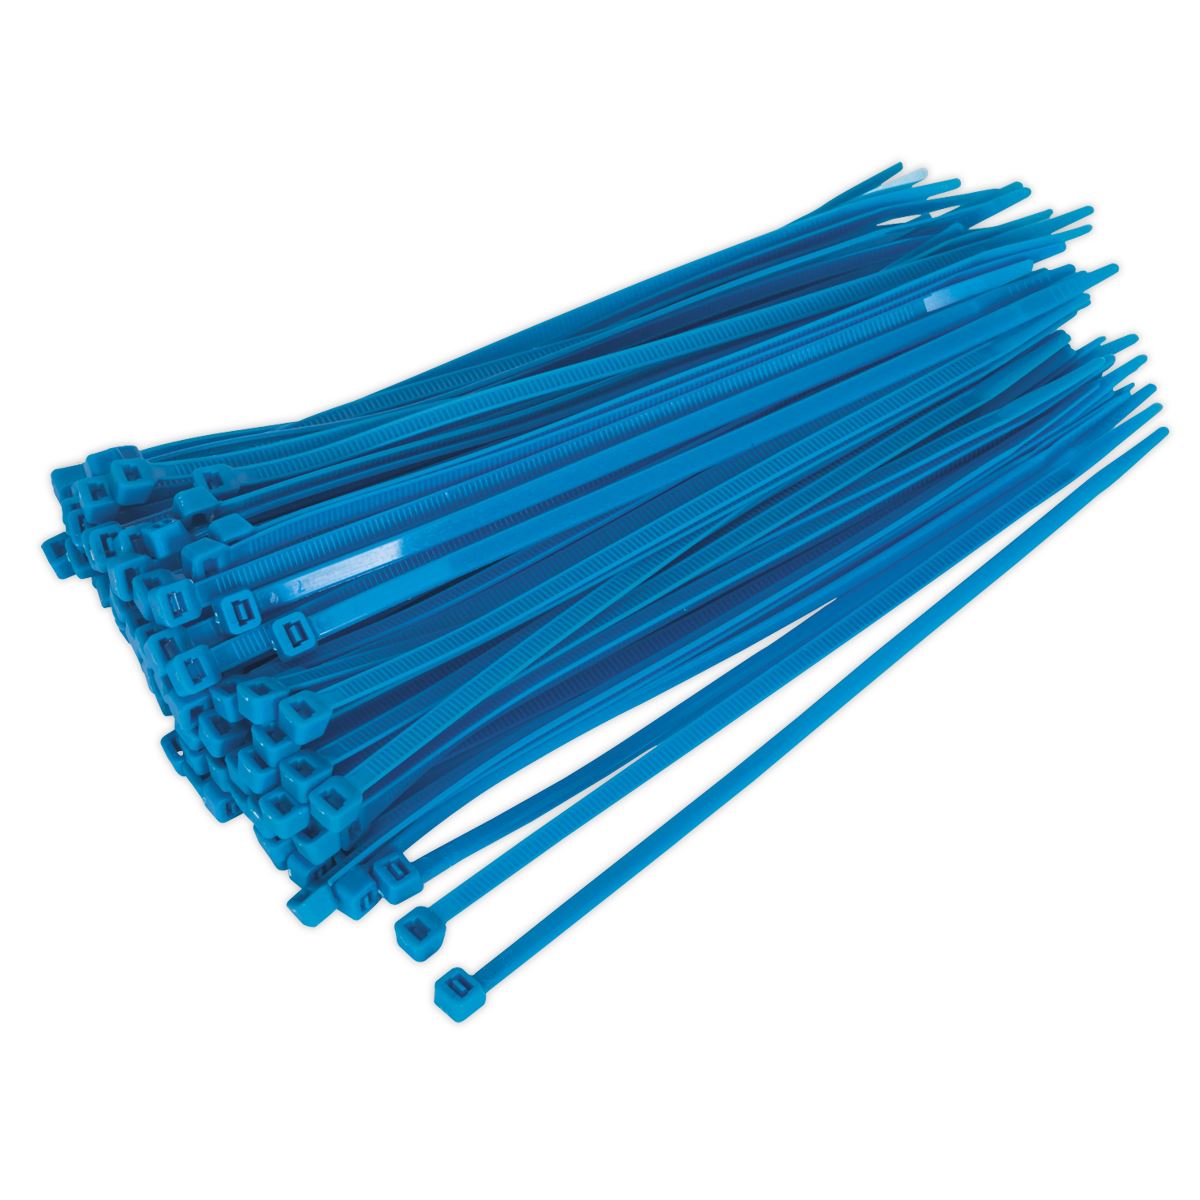 Sealey Cable Tie 200 x 4.4mm Blue Pack of 100